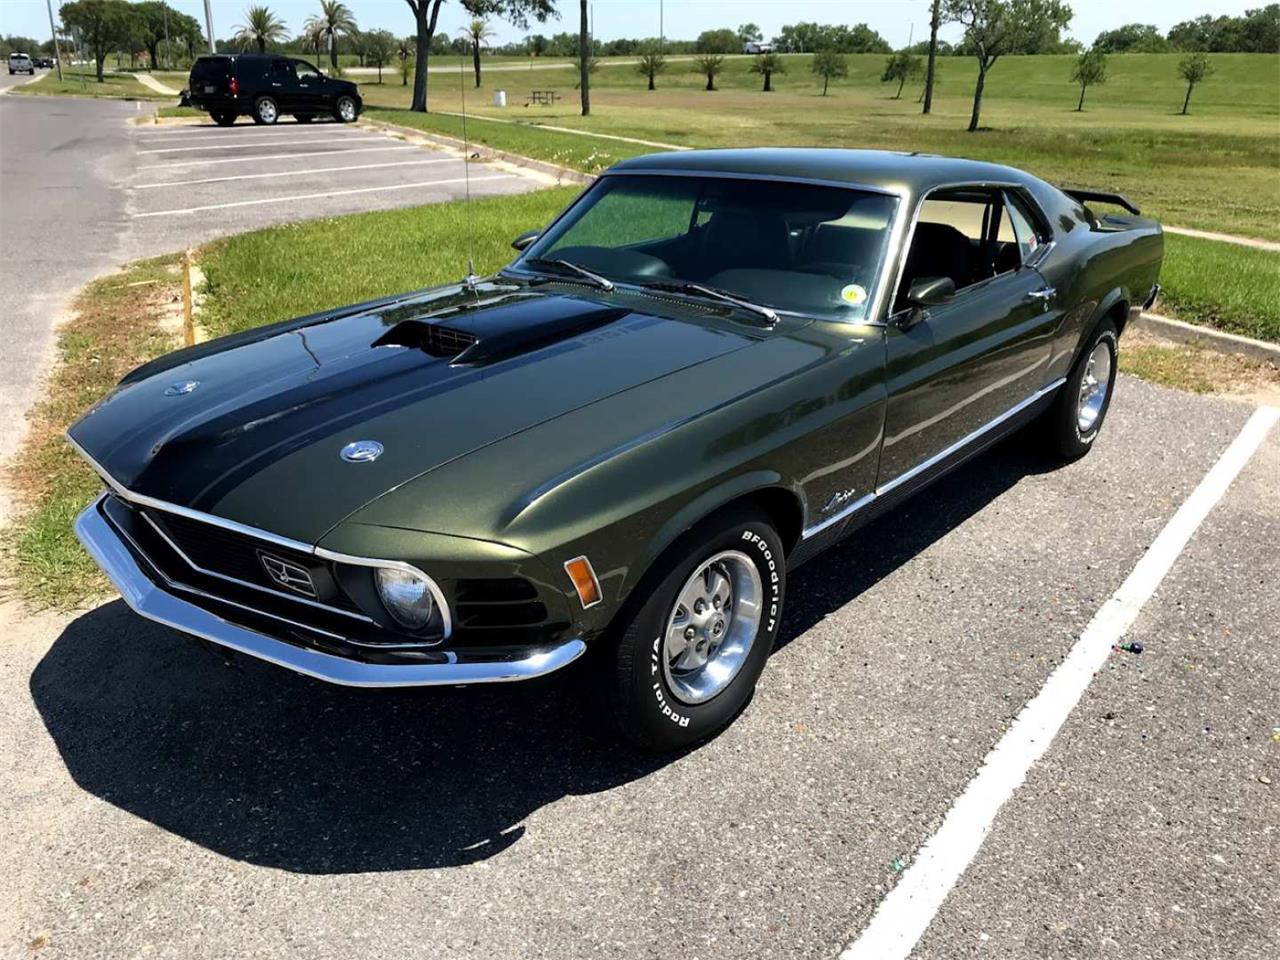 1970 Ford Mustang Mach 1 for Sale | ClassicCars.com | CC-1145845